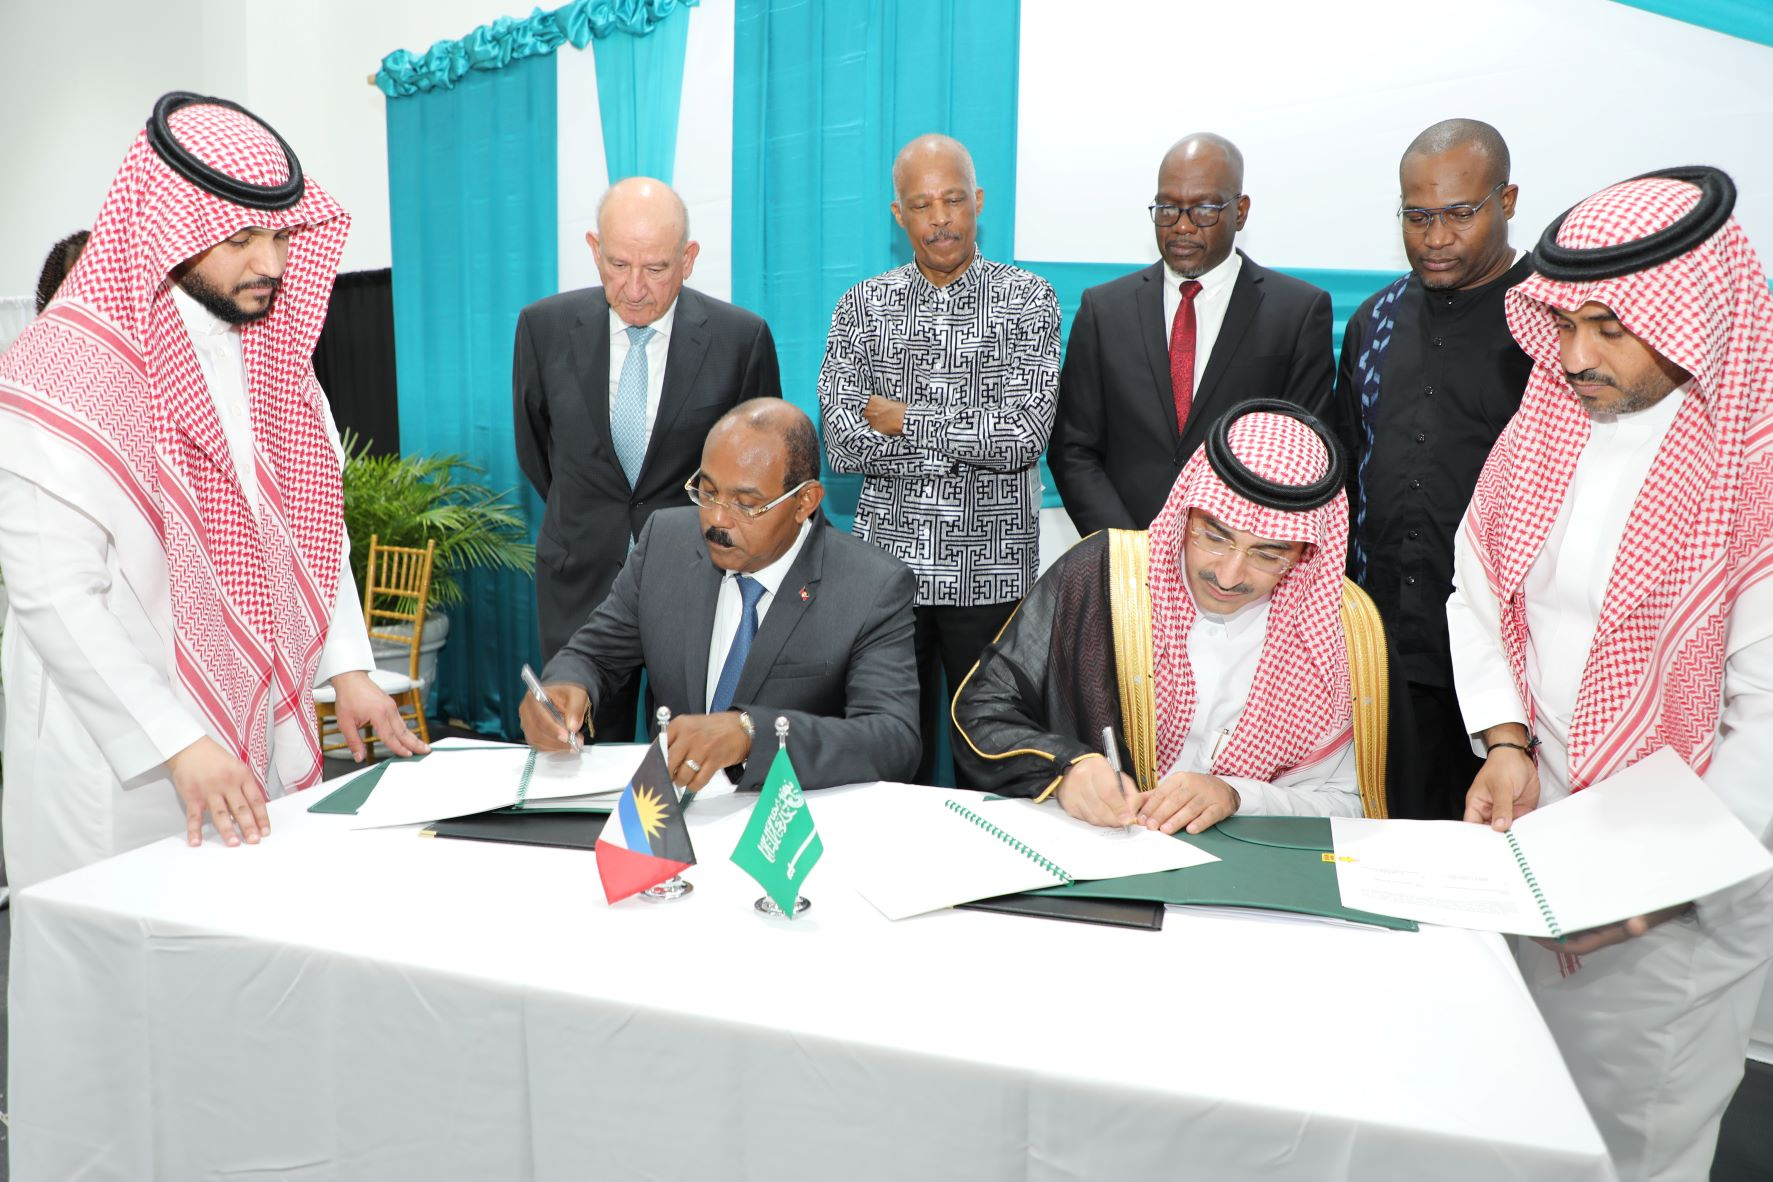 Saudi Fund for Development Expands Operations in Caribbean Countries with Agreement to Fund University of the West Indies Expansion Project at Five Islands in Antigua and Barbuda |  business thread